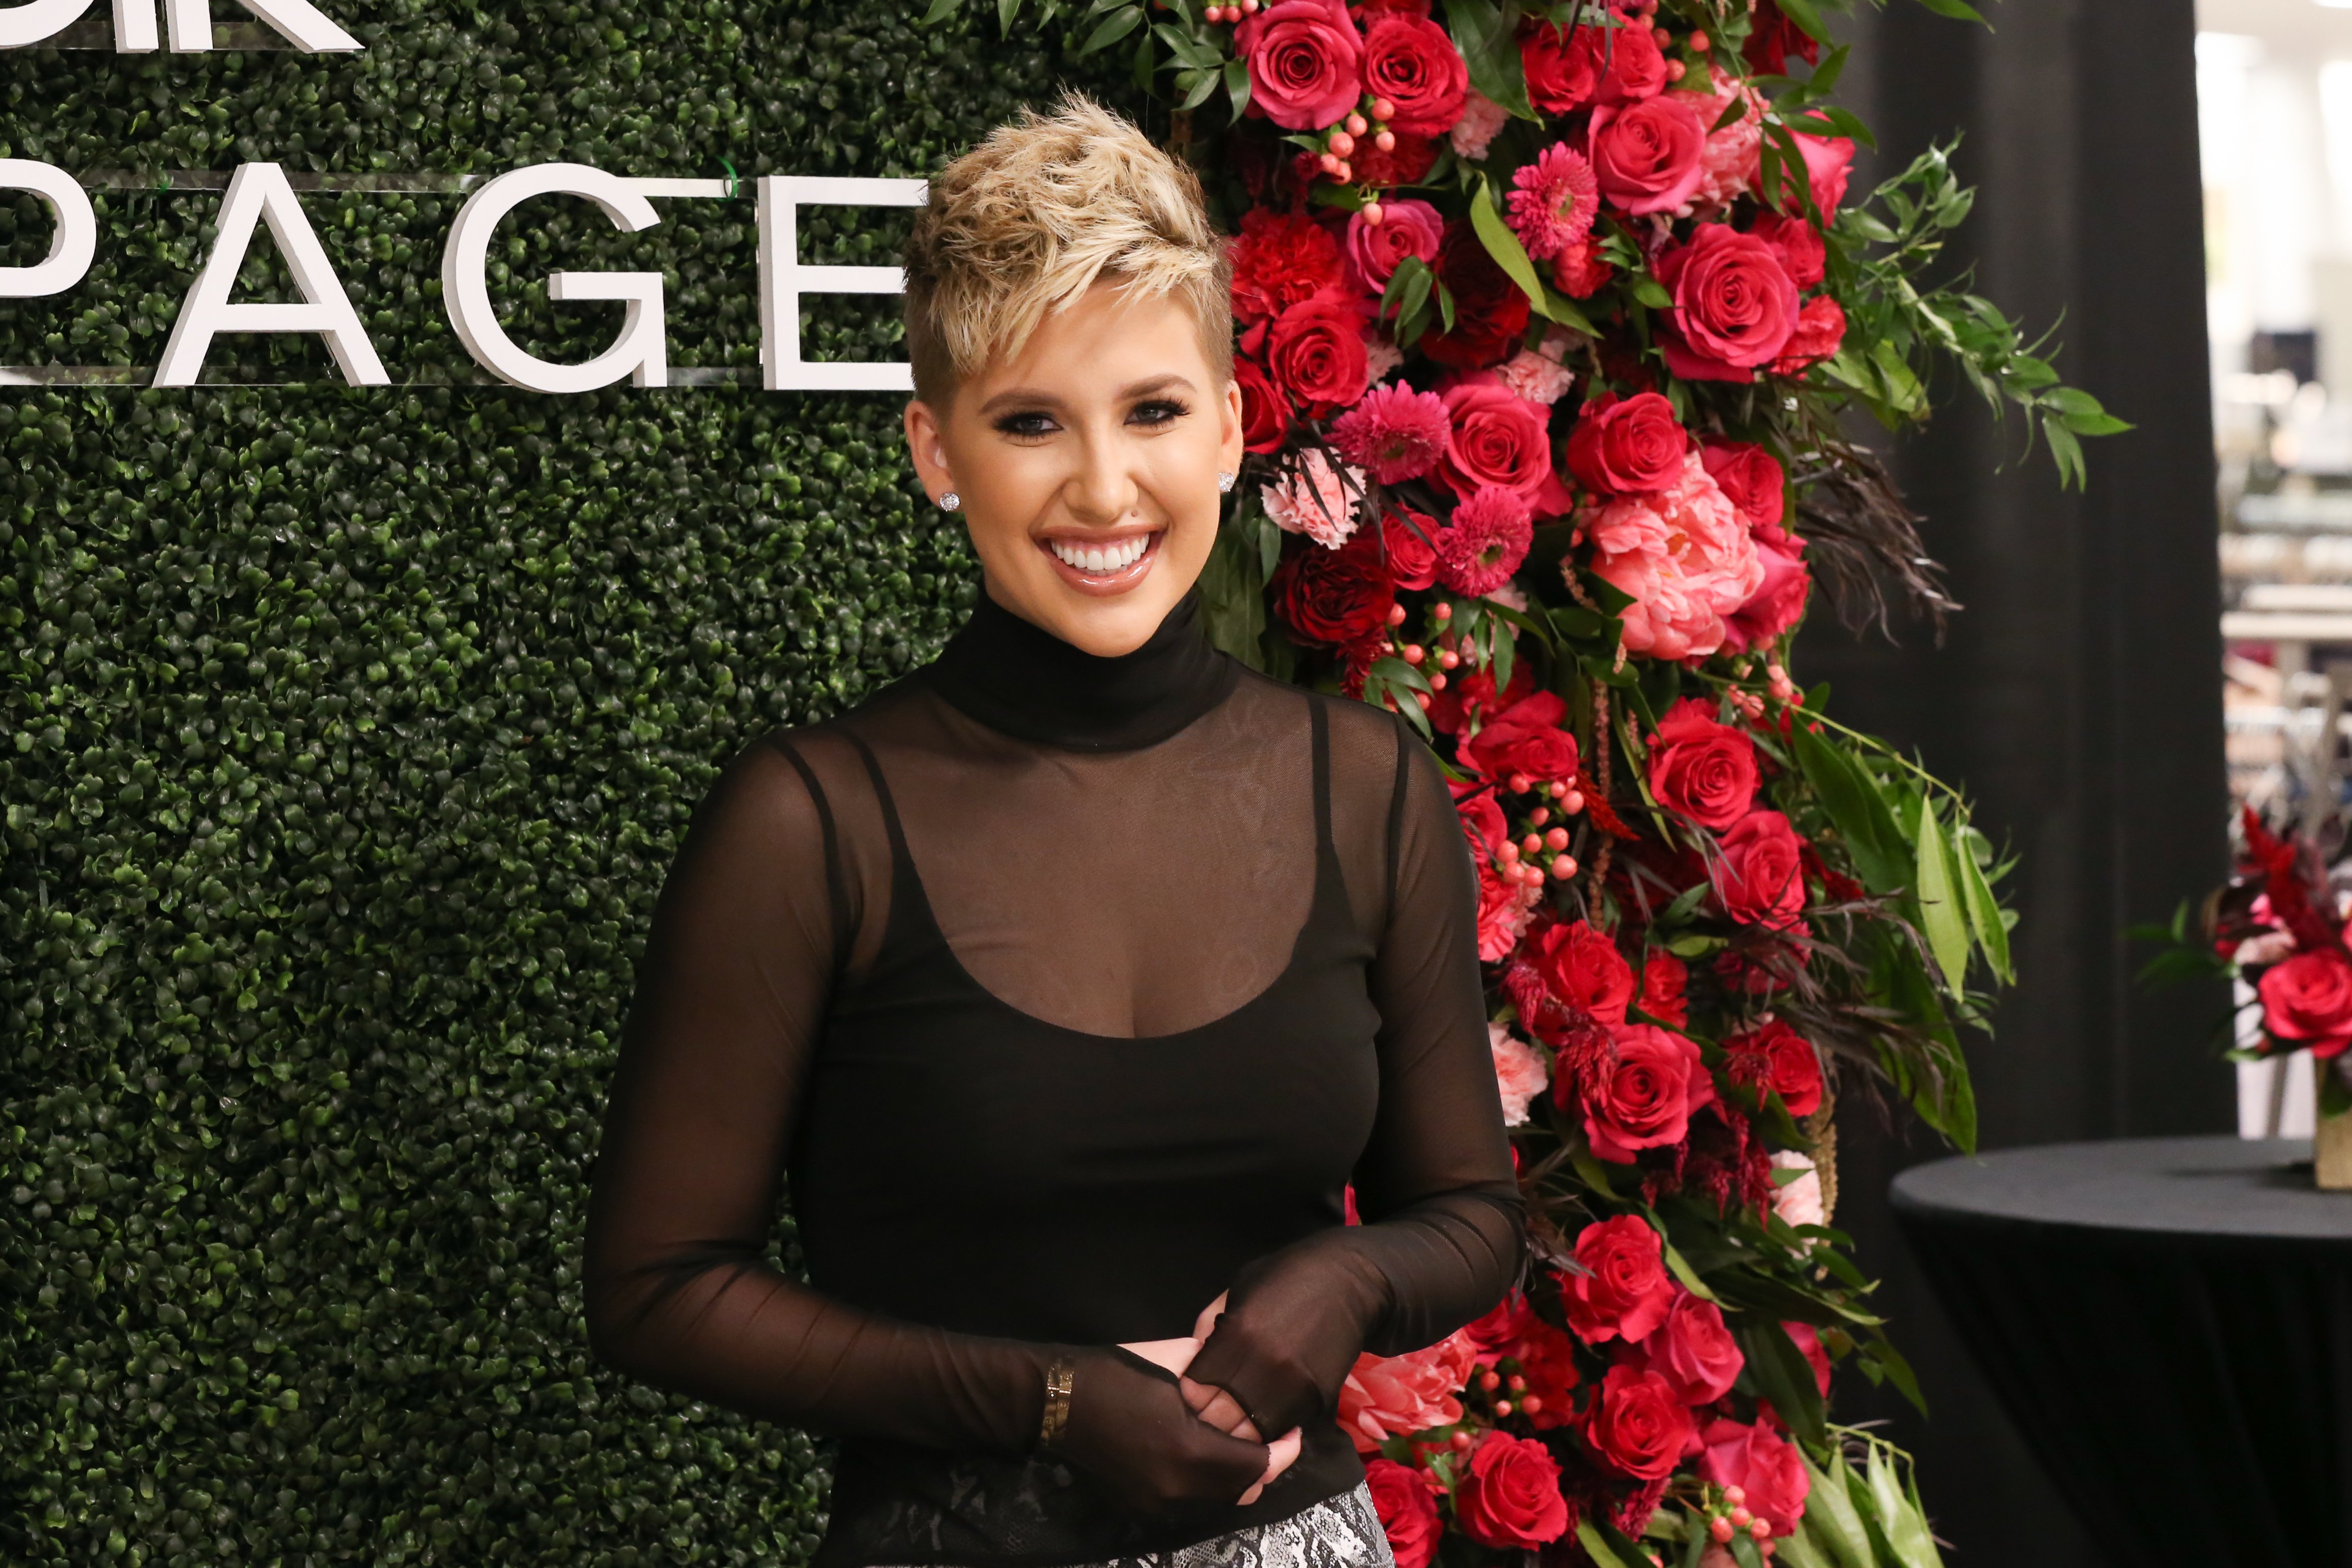  Savannah Chrisley makes a personal appearance at Belk at Cool Springs Galleria Mall on November 05, 2019 in Franklin, Tennessee | Photo: Getty Images